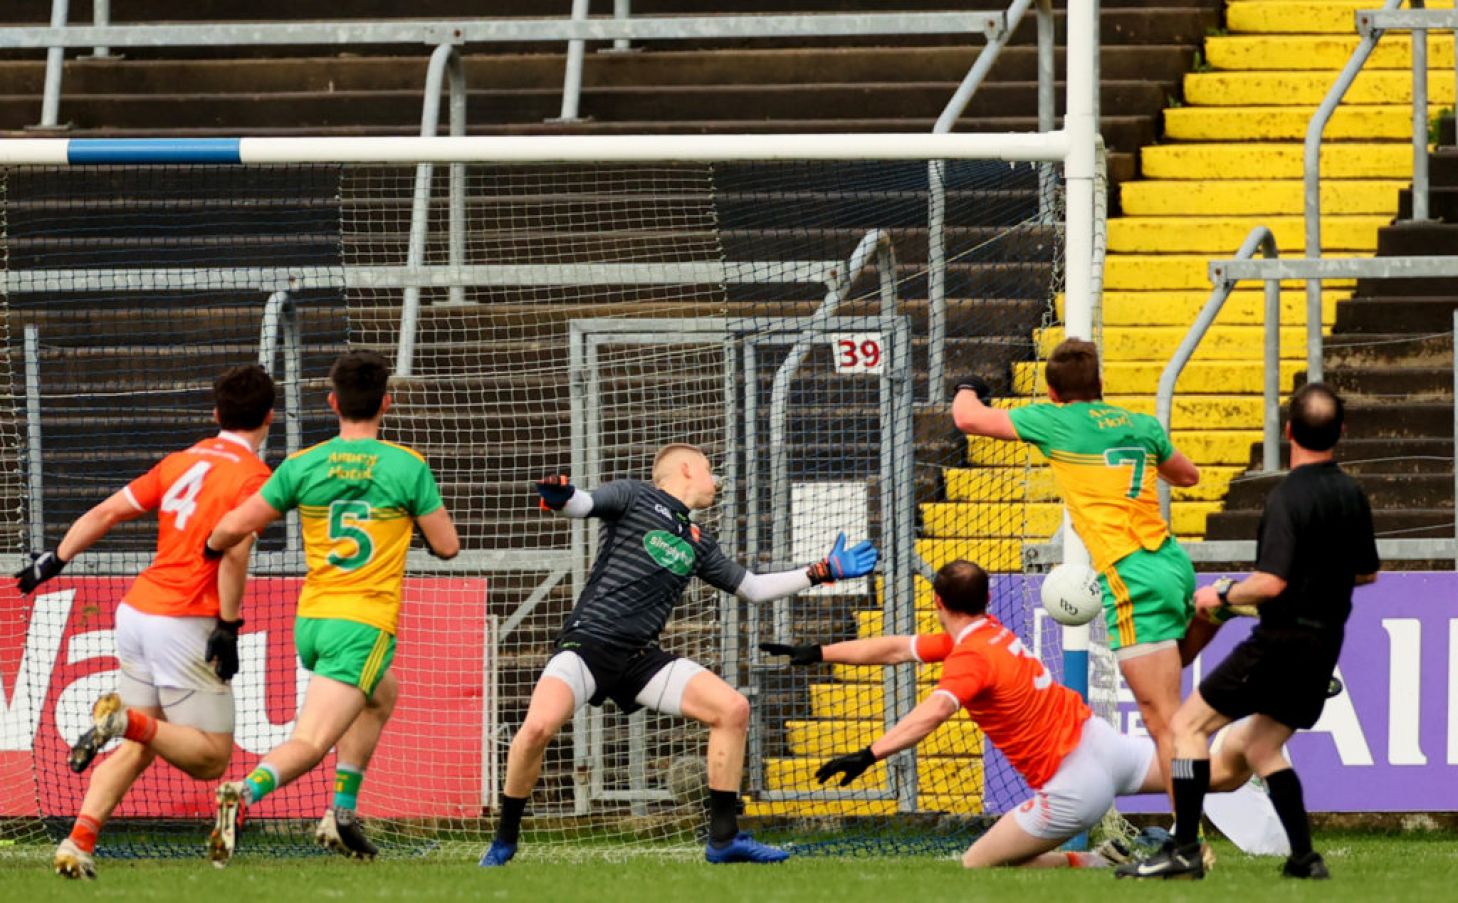 Donegal's Peadar Mogan Fires A Shot Past Blaine Hughes Of Armagh. Photo: James Crombie/Inpho